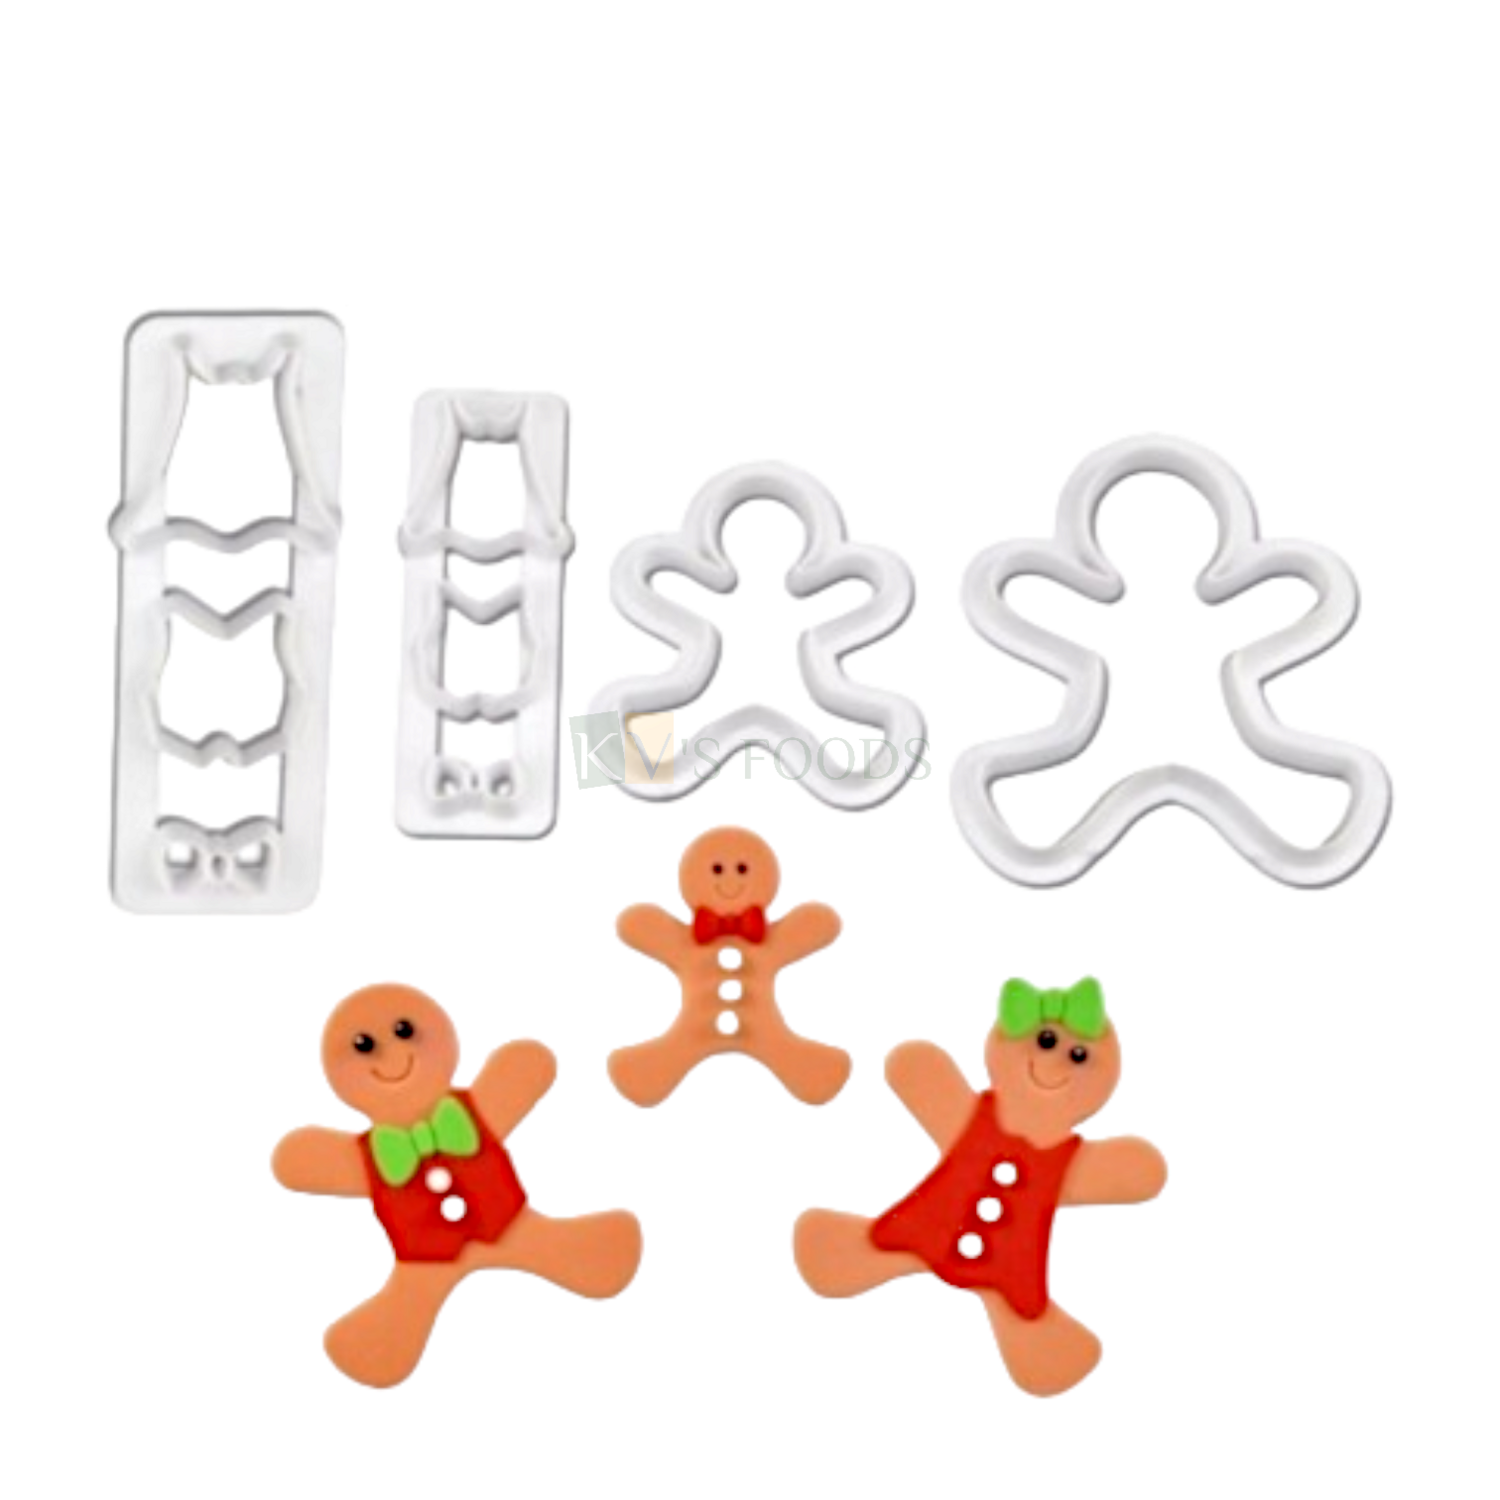 4 PC White Christmas 2 Gingerbread People Set Clothes Bows SKull Cookie Moulds Fondant Cutters, Skeleton Man Cakes Biscuits Chocolates Birthday Christmas Tree Parties Halloween Decorations